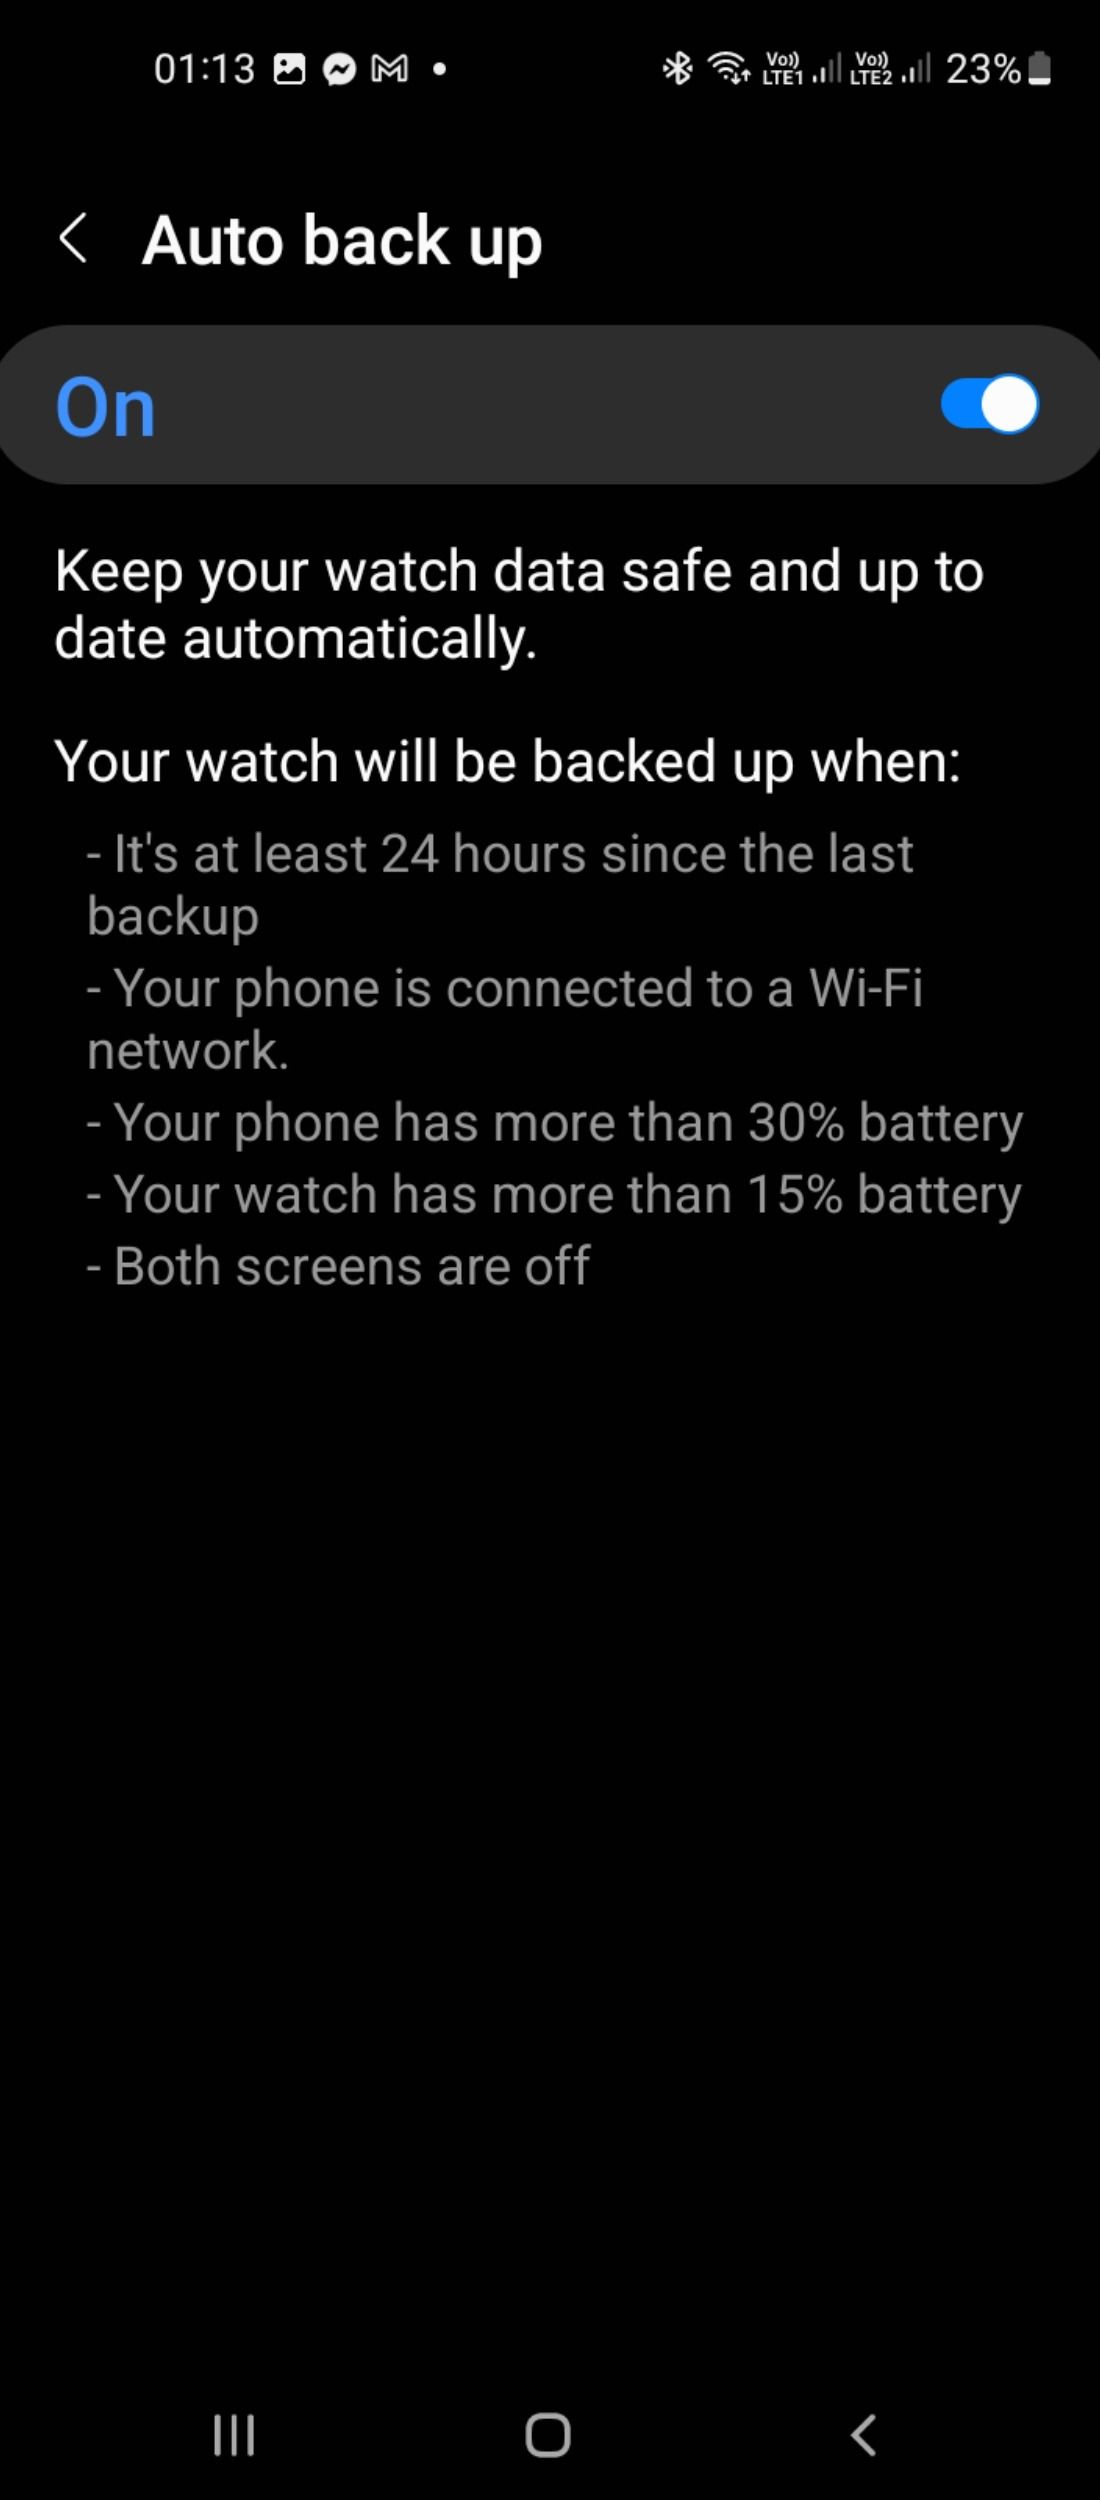 Auto-back up settings for Samsung smartwatch